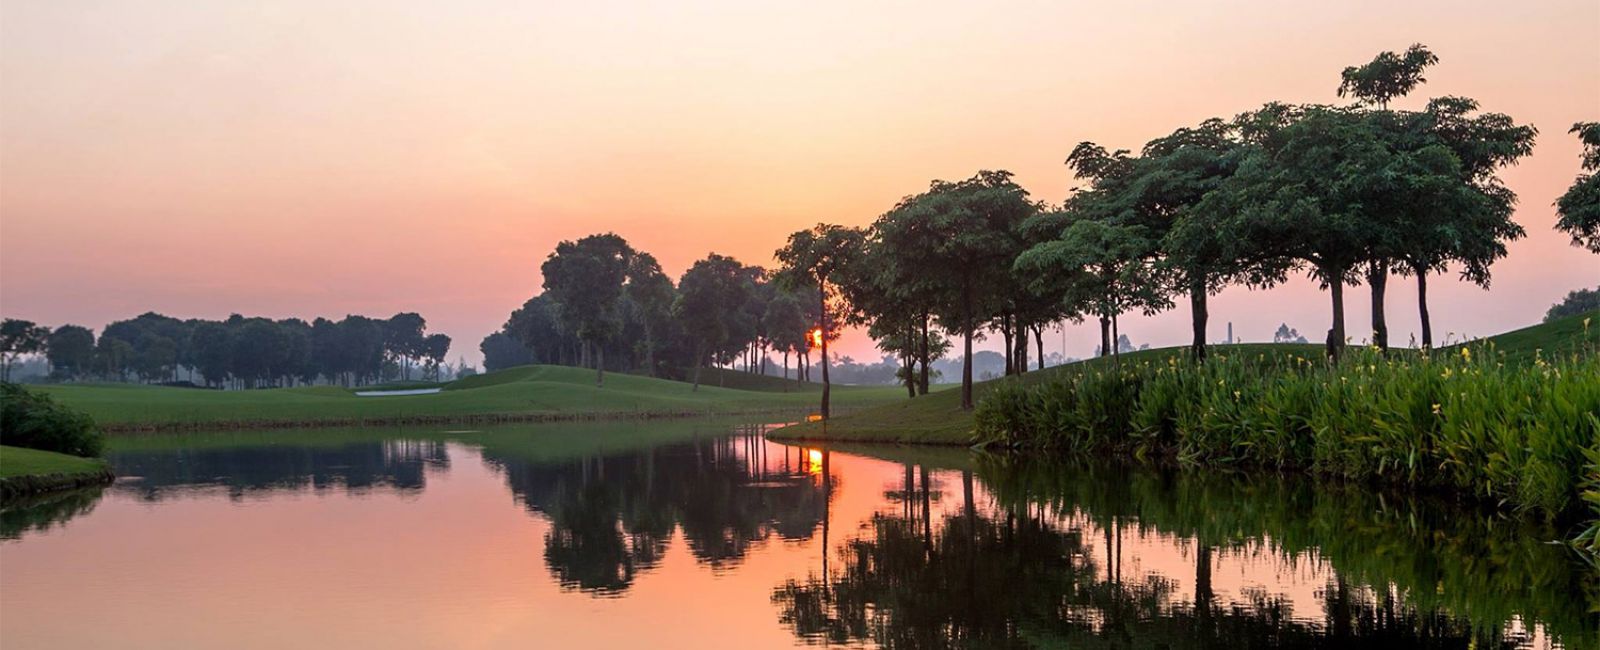 Hanoi Golf Package 3 Days 2 Nights And 2 Rounds